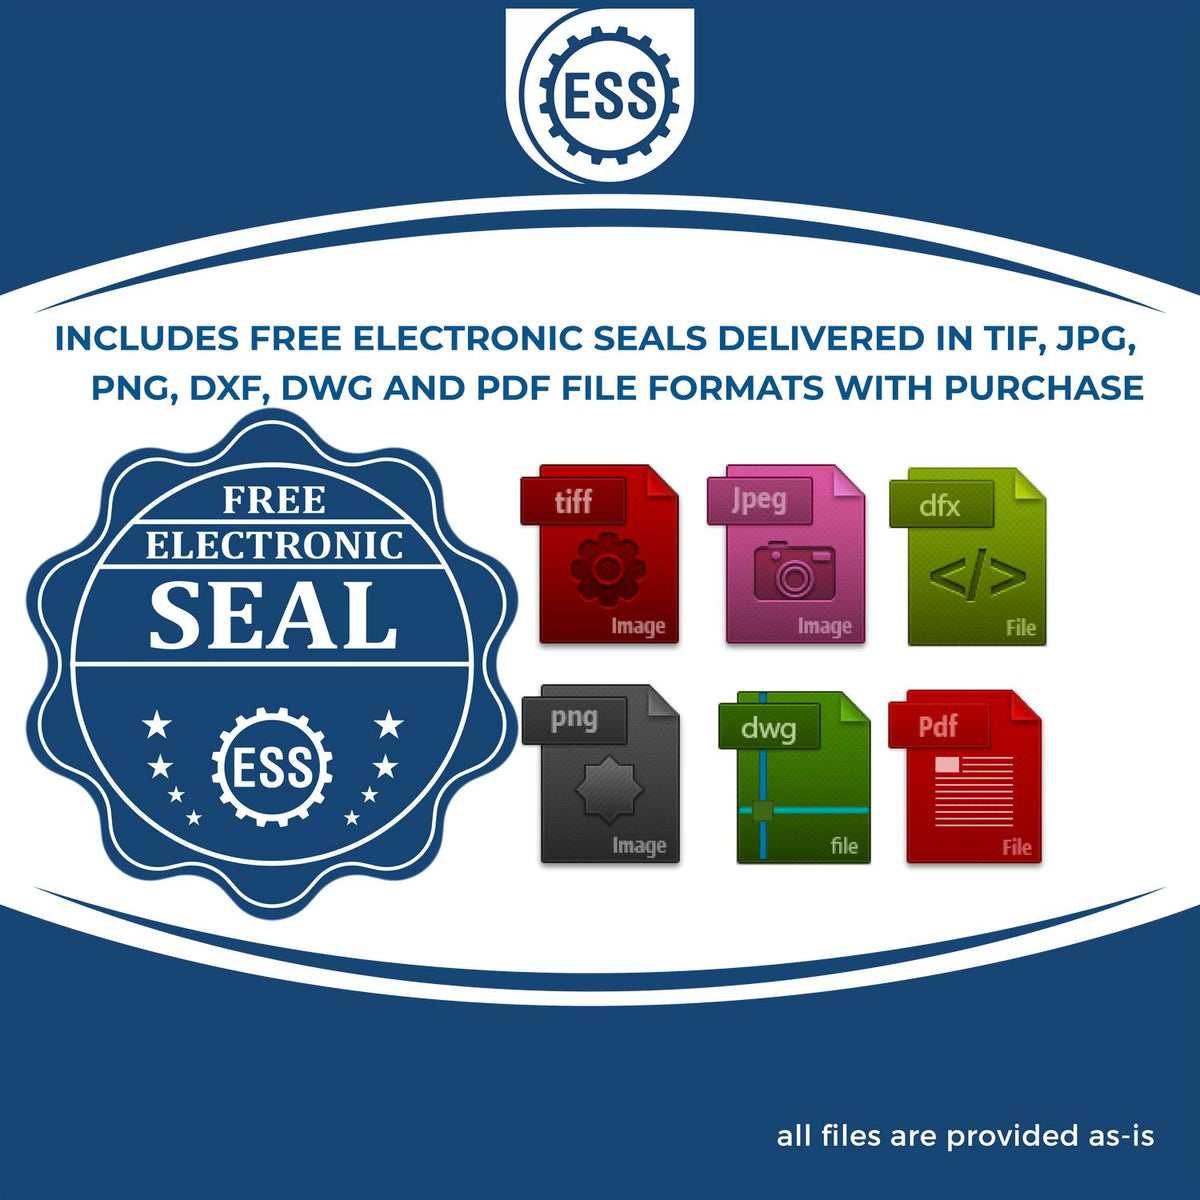 An infographic for the free electronic seal for the MaxLight Premium Pre-Inked Nevada State Seal Notarial Stamp illustrating the different file type icons such as DXF, DWG, TIF, JPG and PNG.